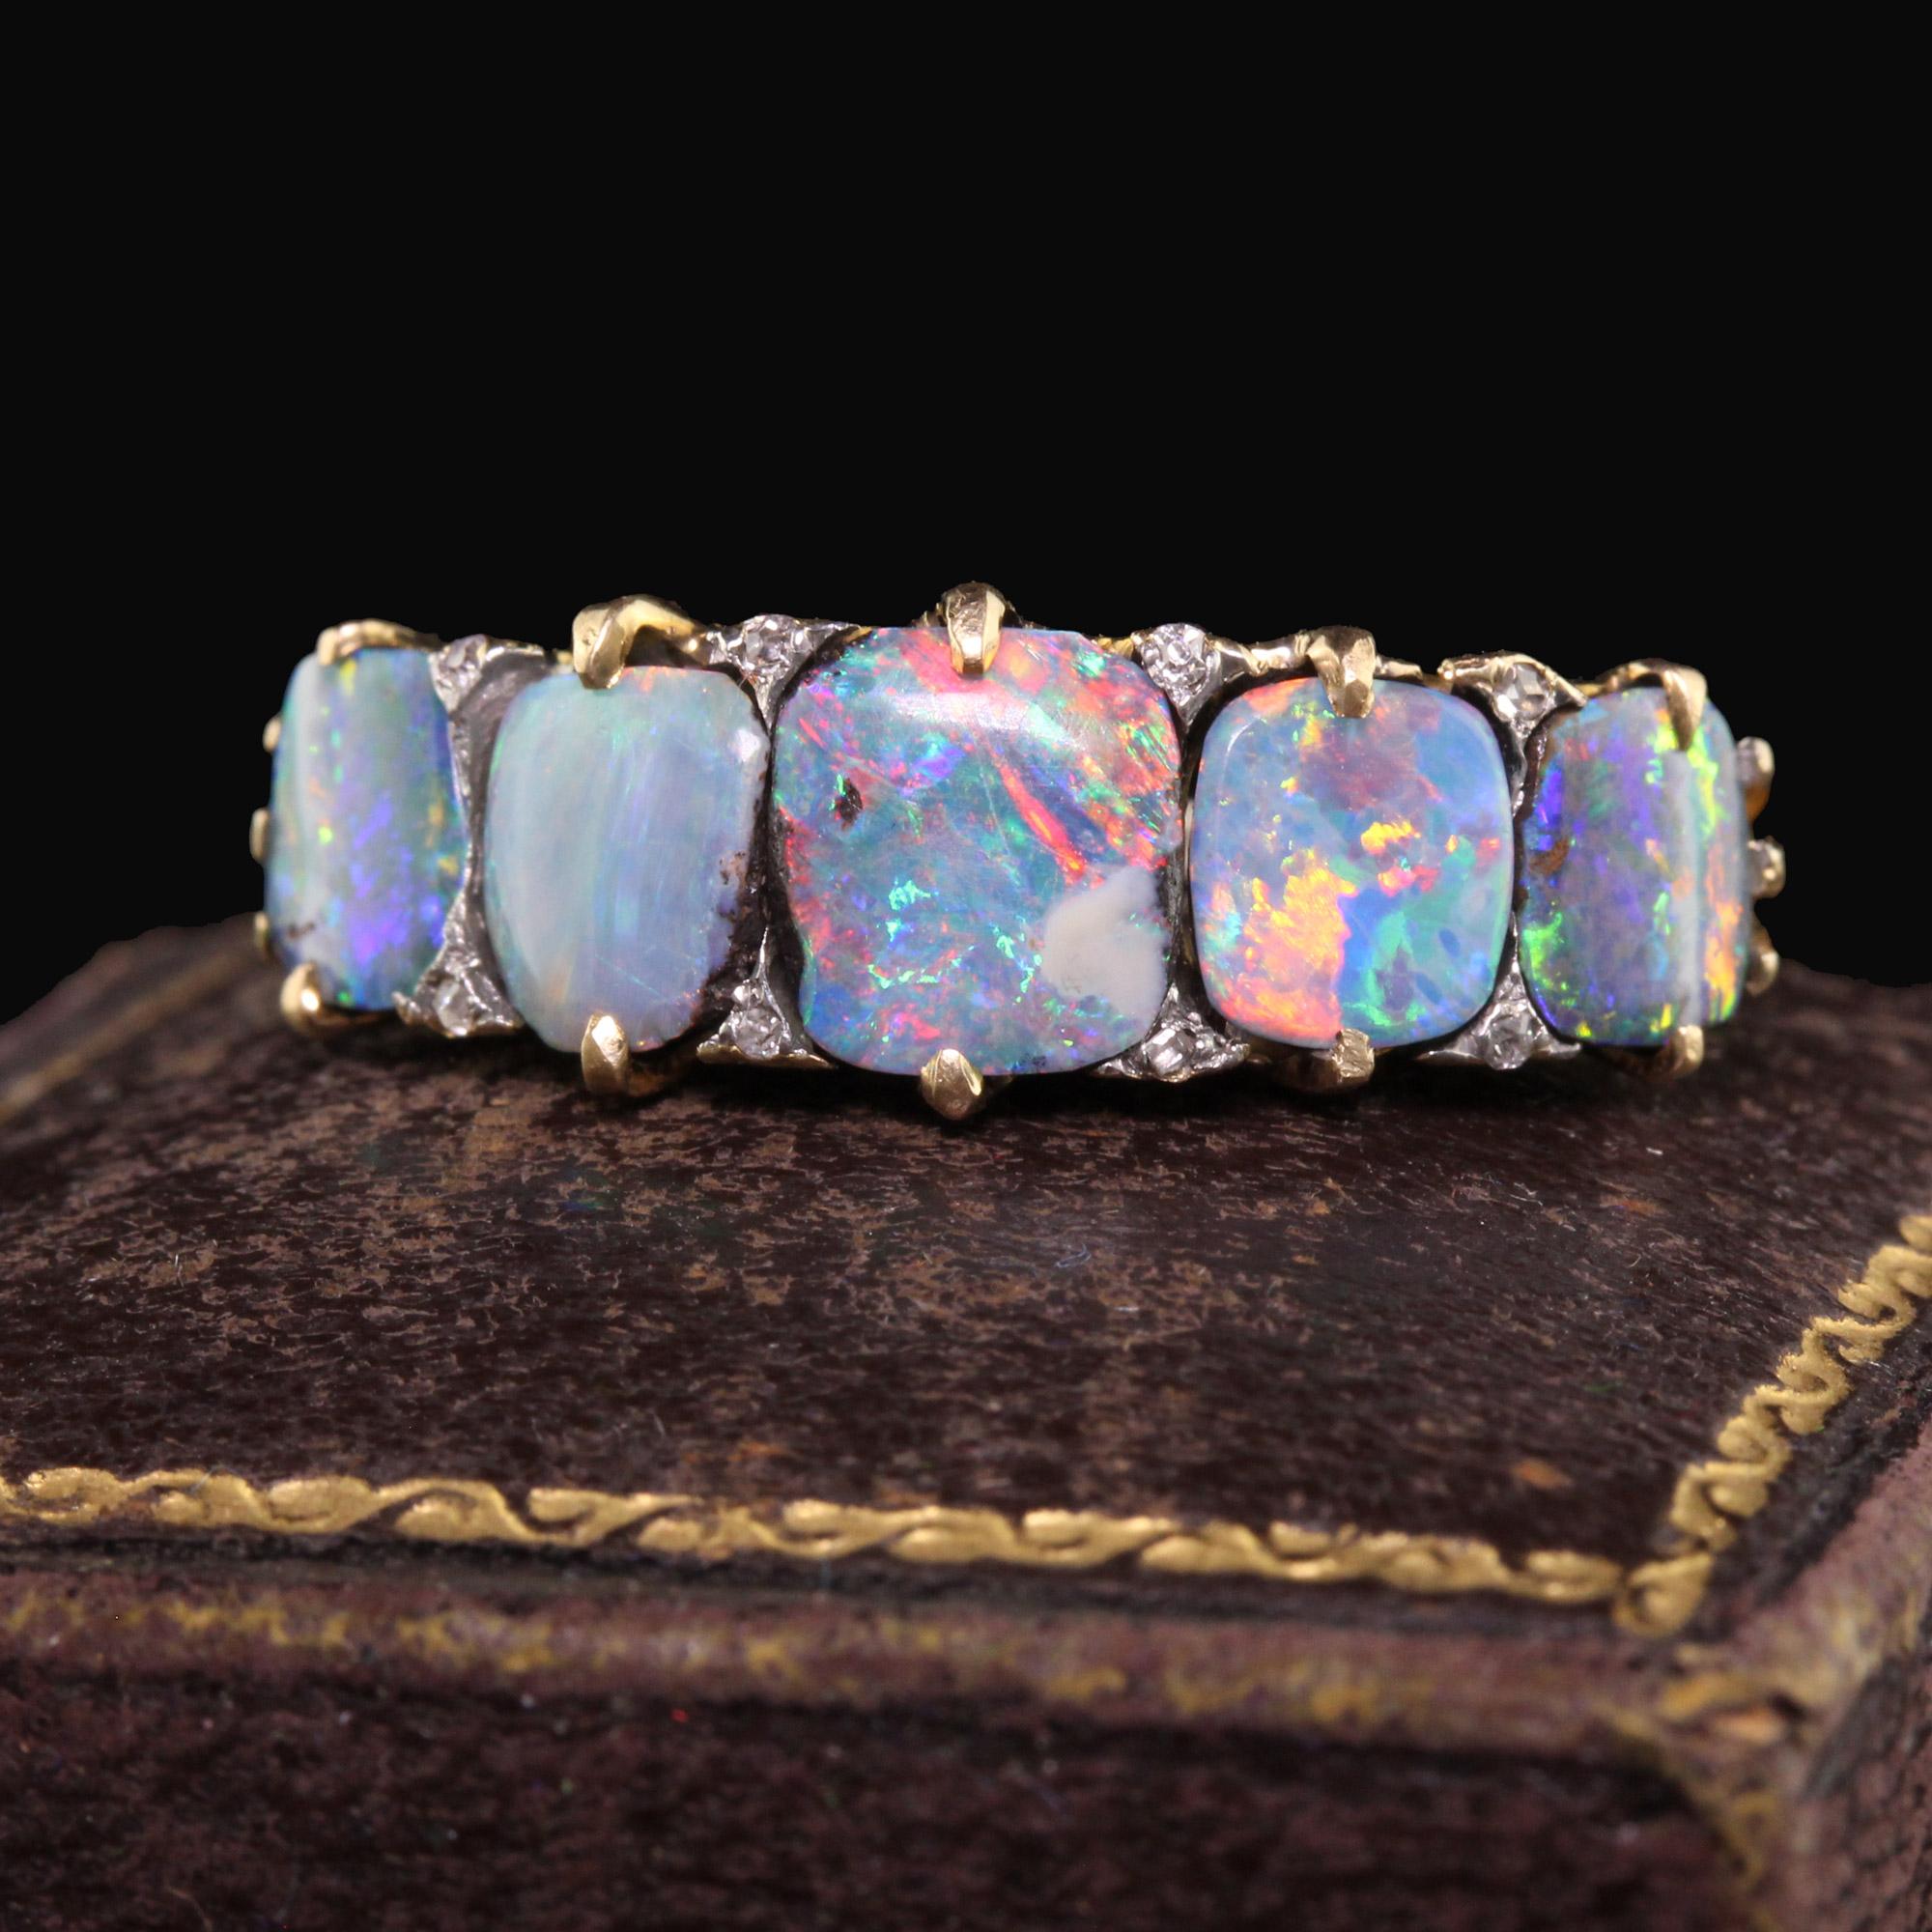 Beautiful Antique Victorian Tiffany and Co Boulder Opal Five Stone Wedding Band - Size 8. This incredible ring is crafted in 18k yellow gold. The ring holds five gorgeous Australian boulder opals that have a full array of color including blue,